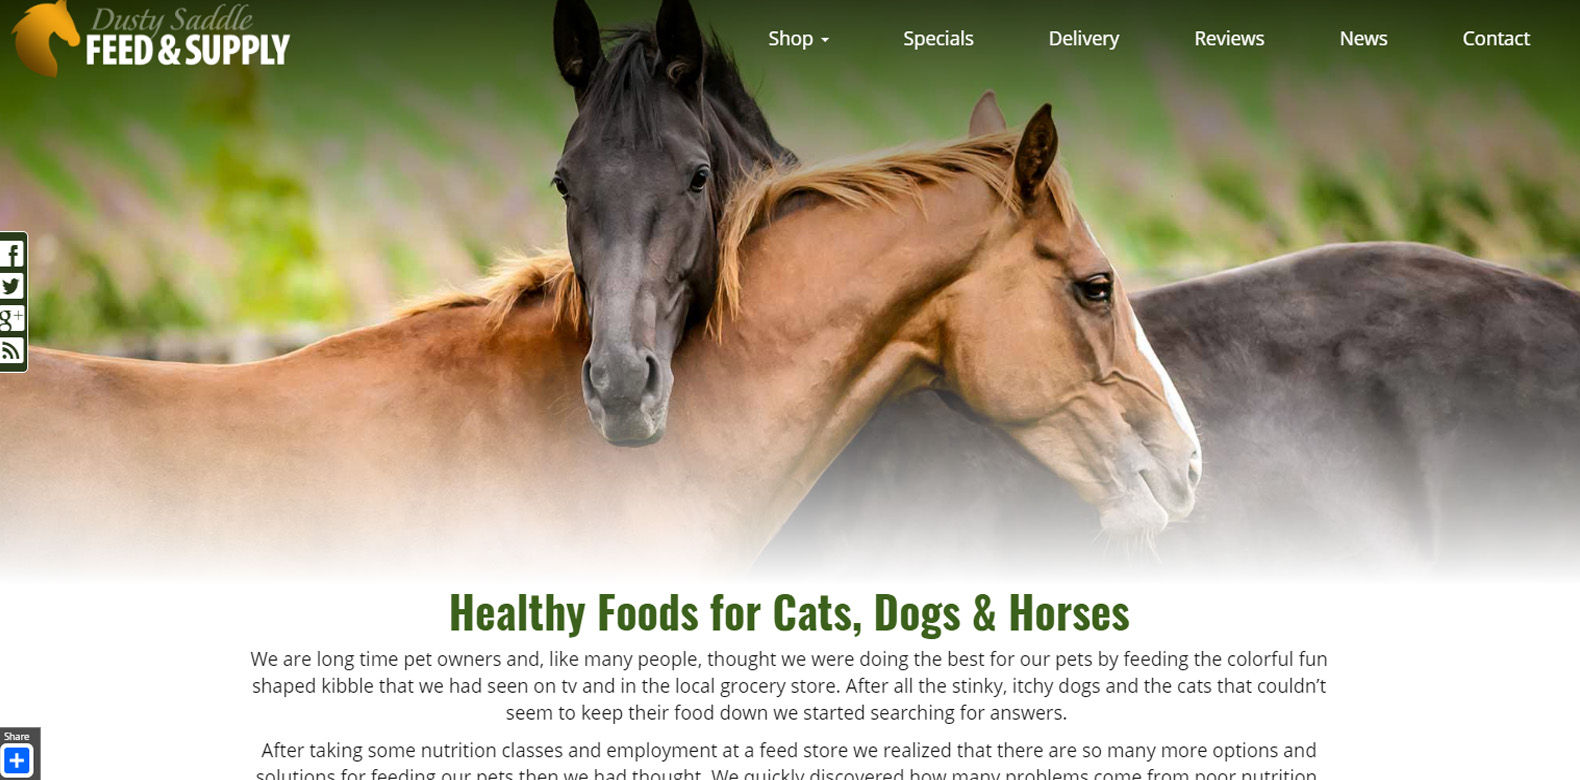 
New Website Launch: Dusty Saddle Feed & Supply